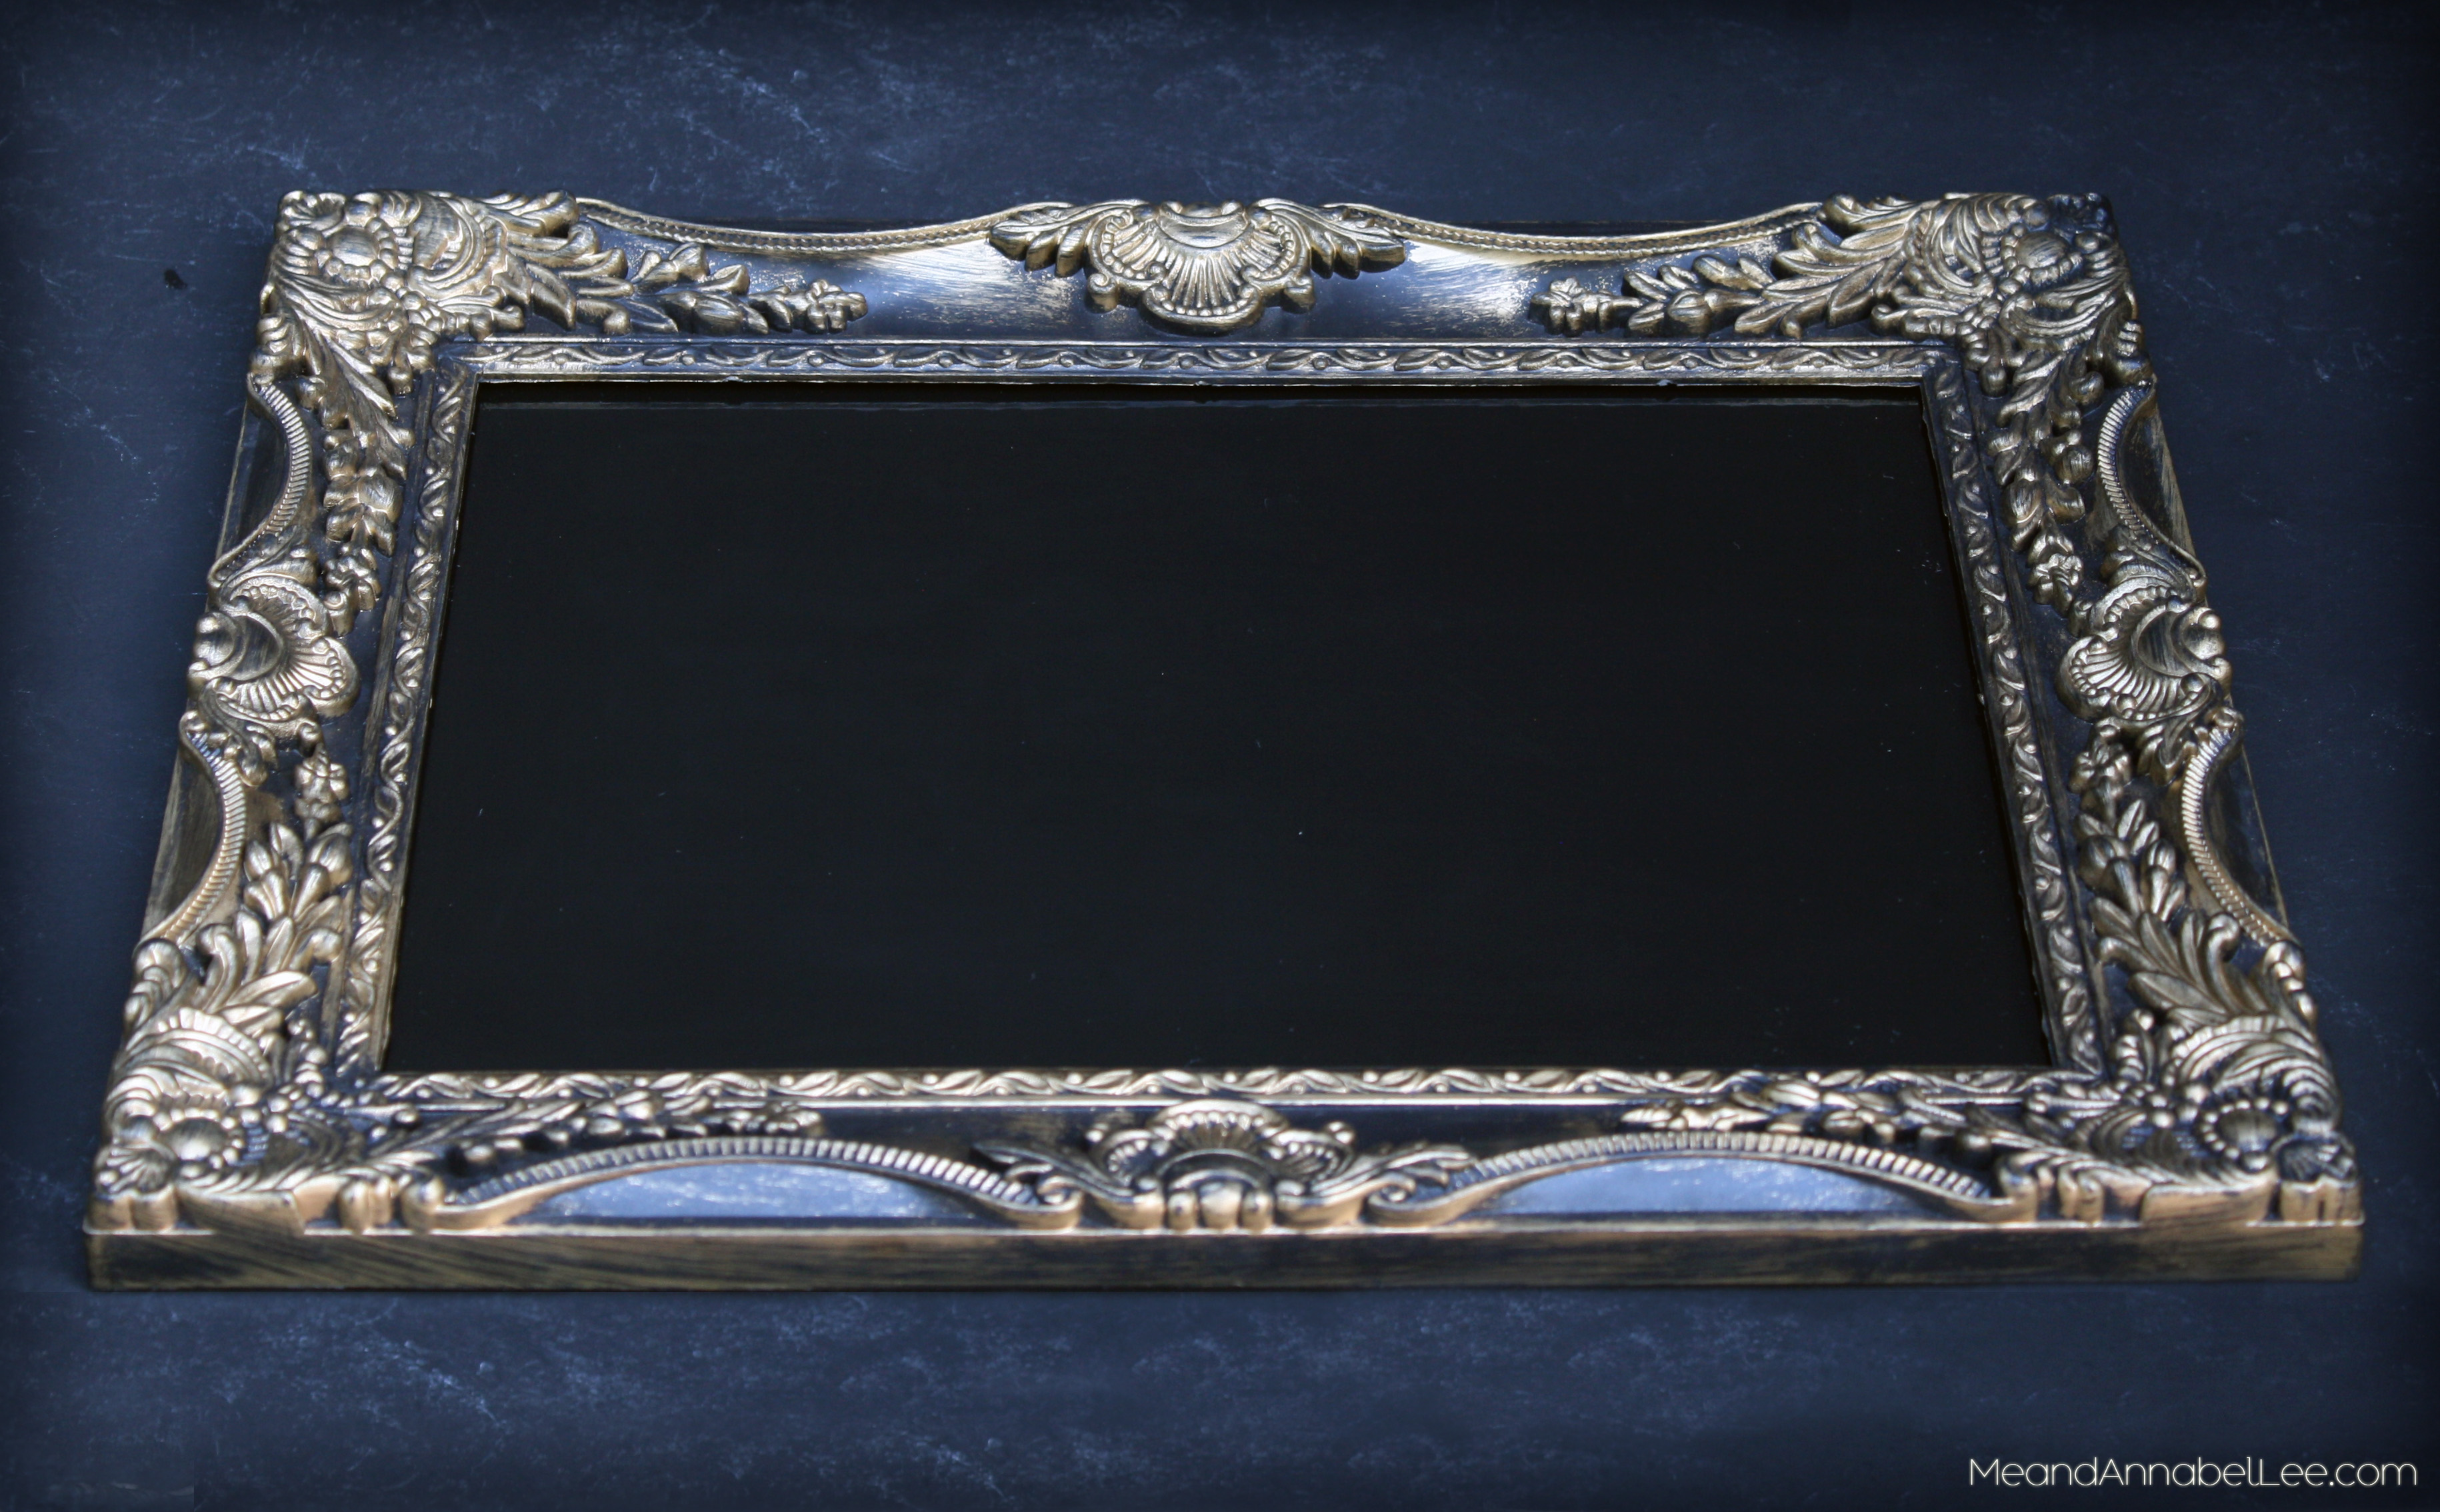 DIY Ornate Gothic Black & Gold Serving Tray - Transform a Thrift Store Frame into a Tray with this Goth It Yourself Project - www.MeandAnnabelLee.com - Blog for all things Dark, Gothic, Victorian, & Unusual